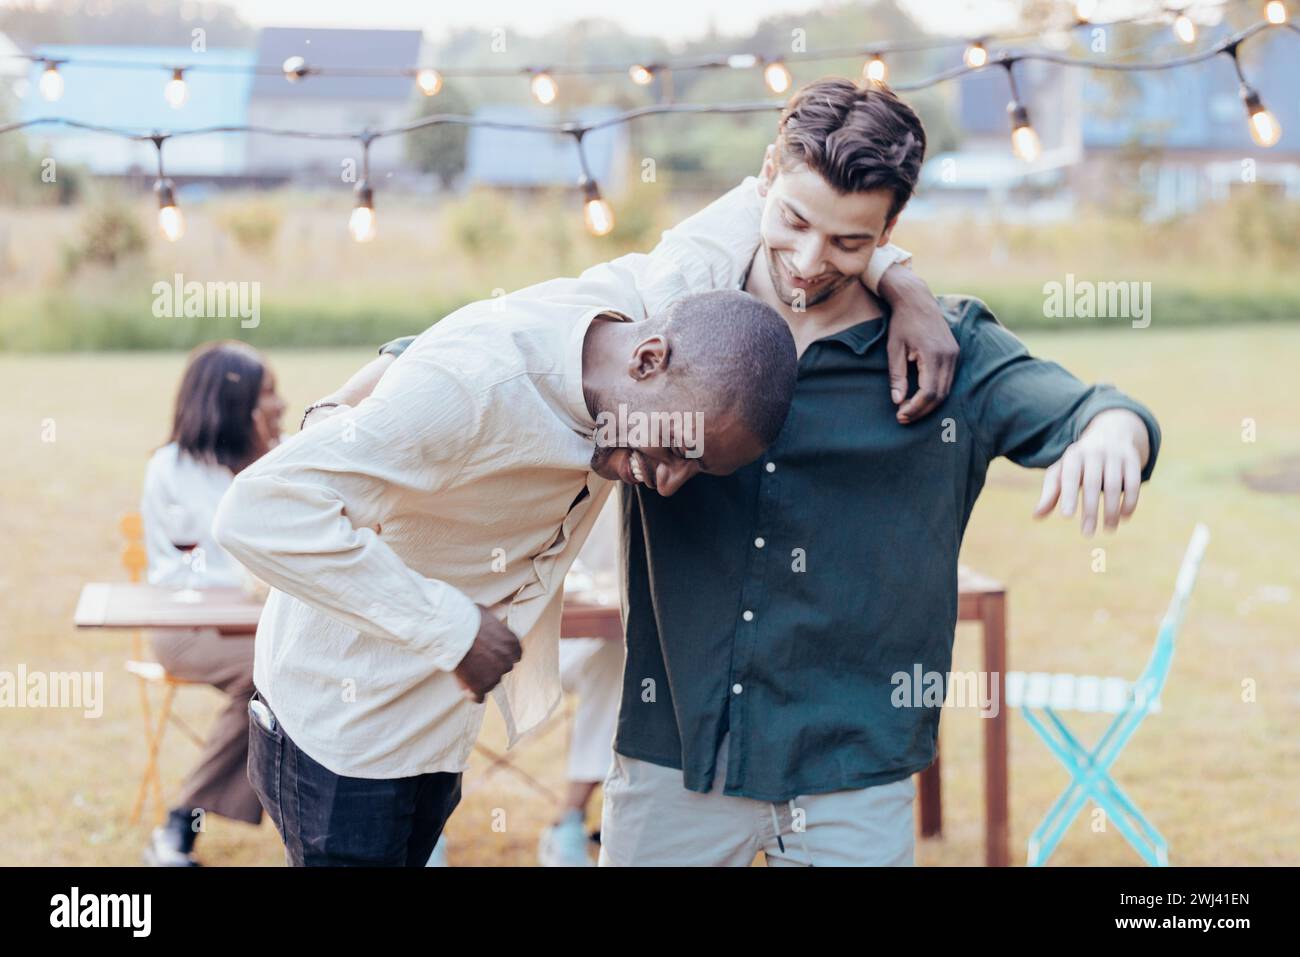 Shared Humor: A Moment of Laughter Between Friends Stock Photo